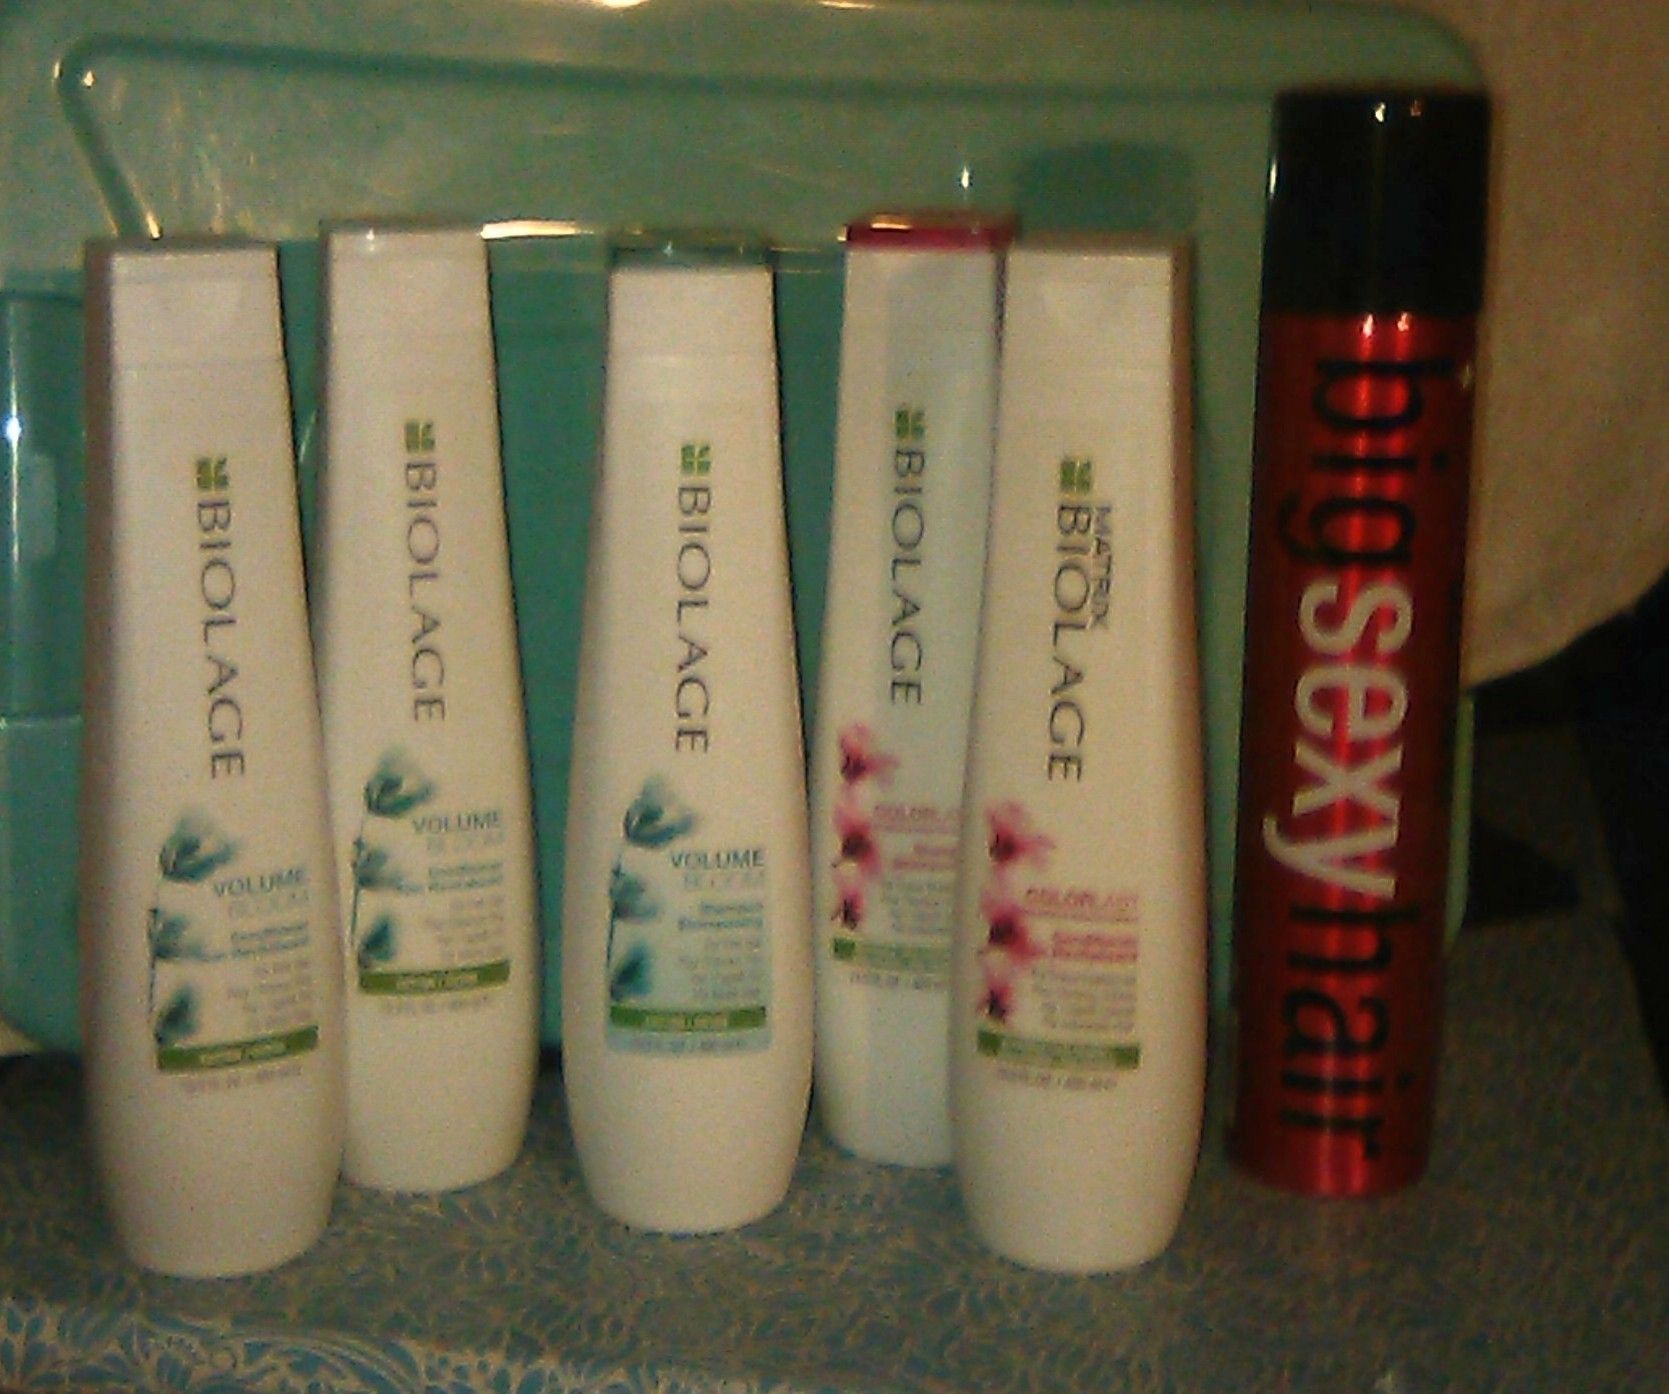 Biolage shampoos and conditioners and 1 big sexy hair spray!!